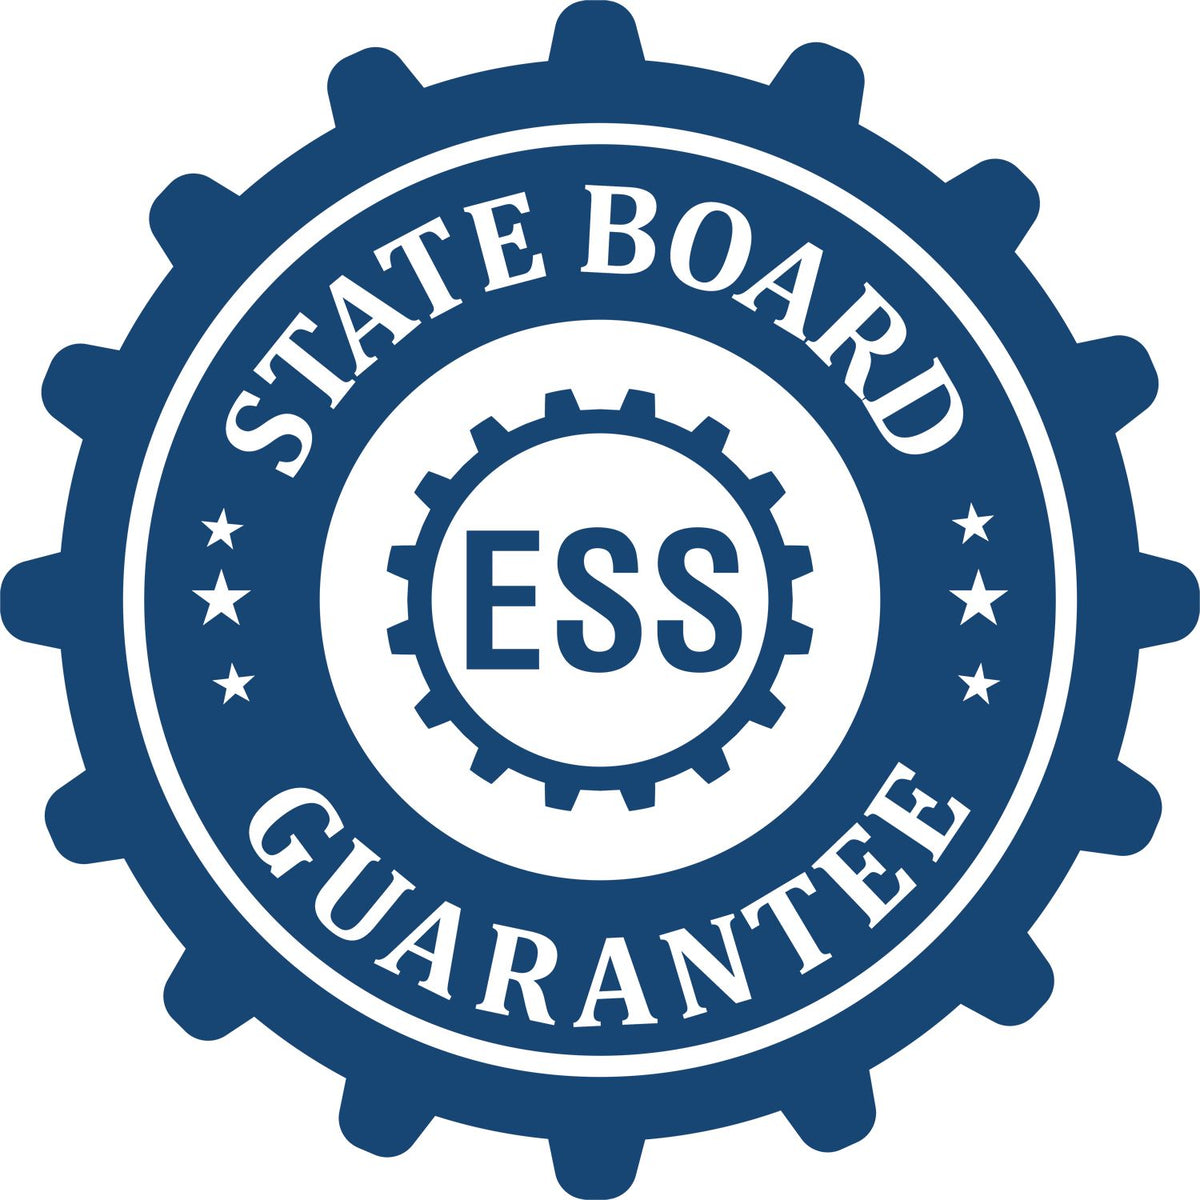 An emblem in a gear shape illustrating a state board guarantee for the MaxLight Premium Pre-Inked Florida Rectangular Notarial Stamp product.